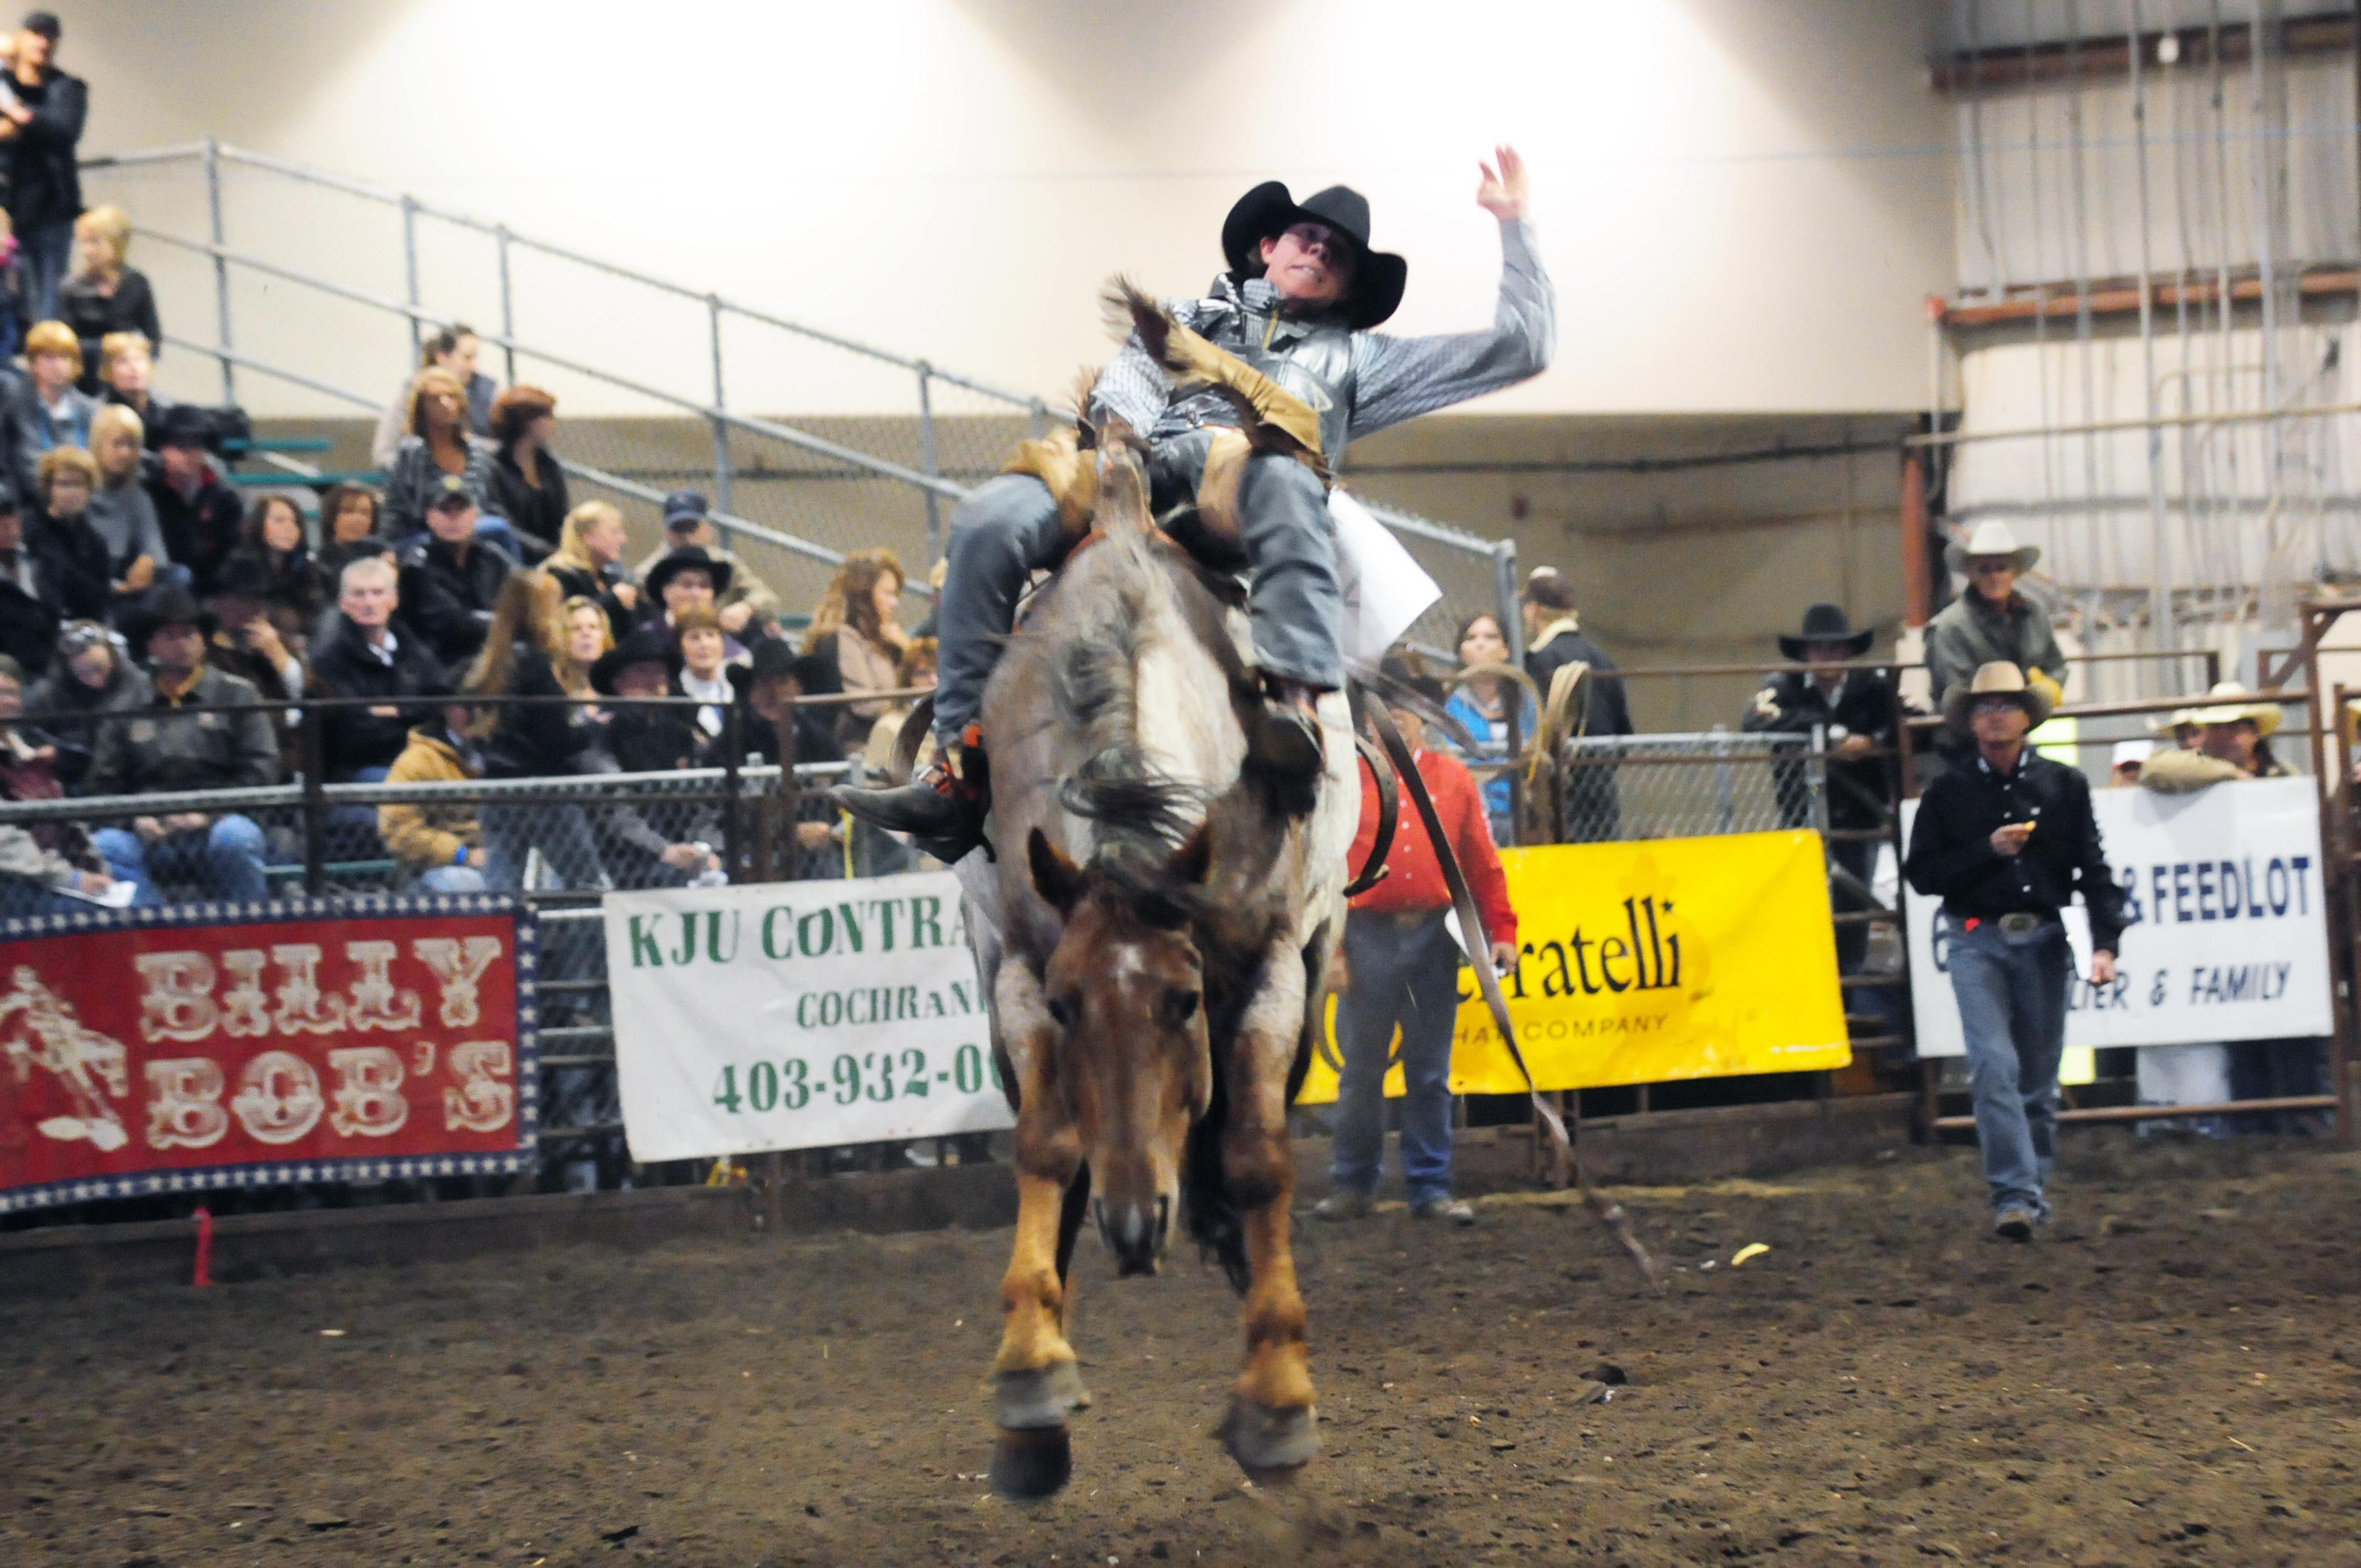 BUMPY RIDE- The Foothills Cowboy Association Cowboy Classic Finals took place this past weekend at the Westerner with cowboys from all over giving it their all.